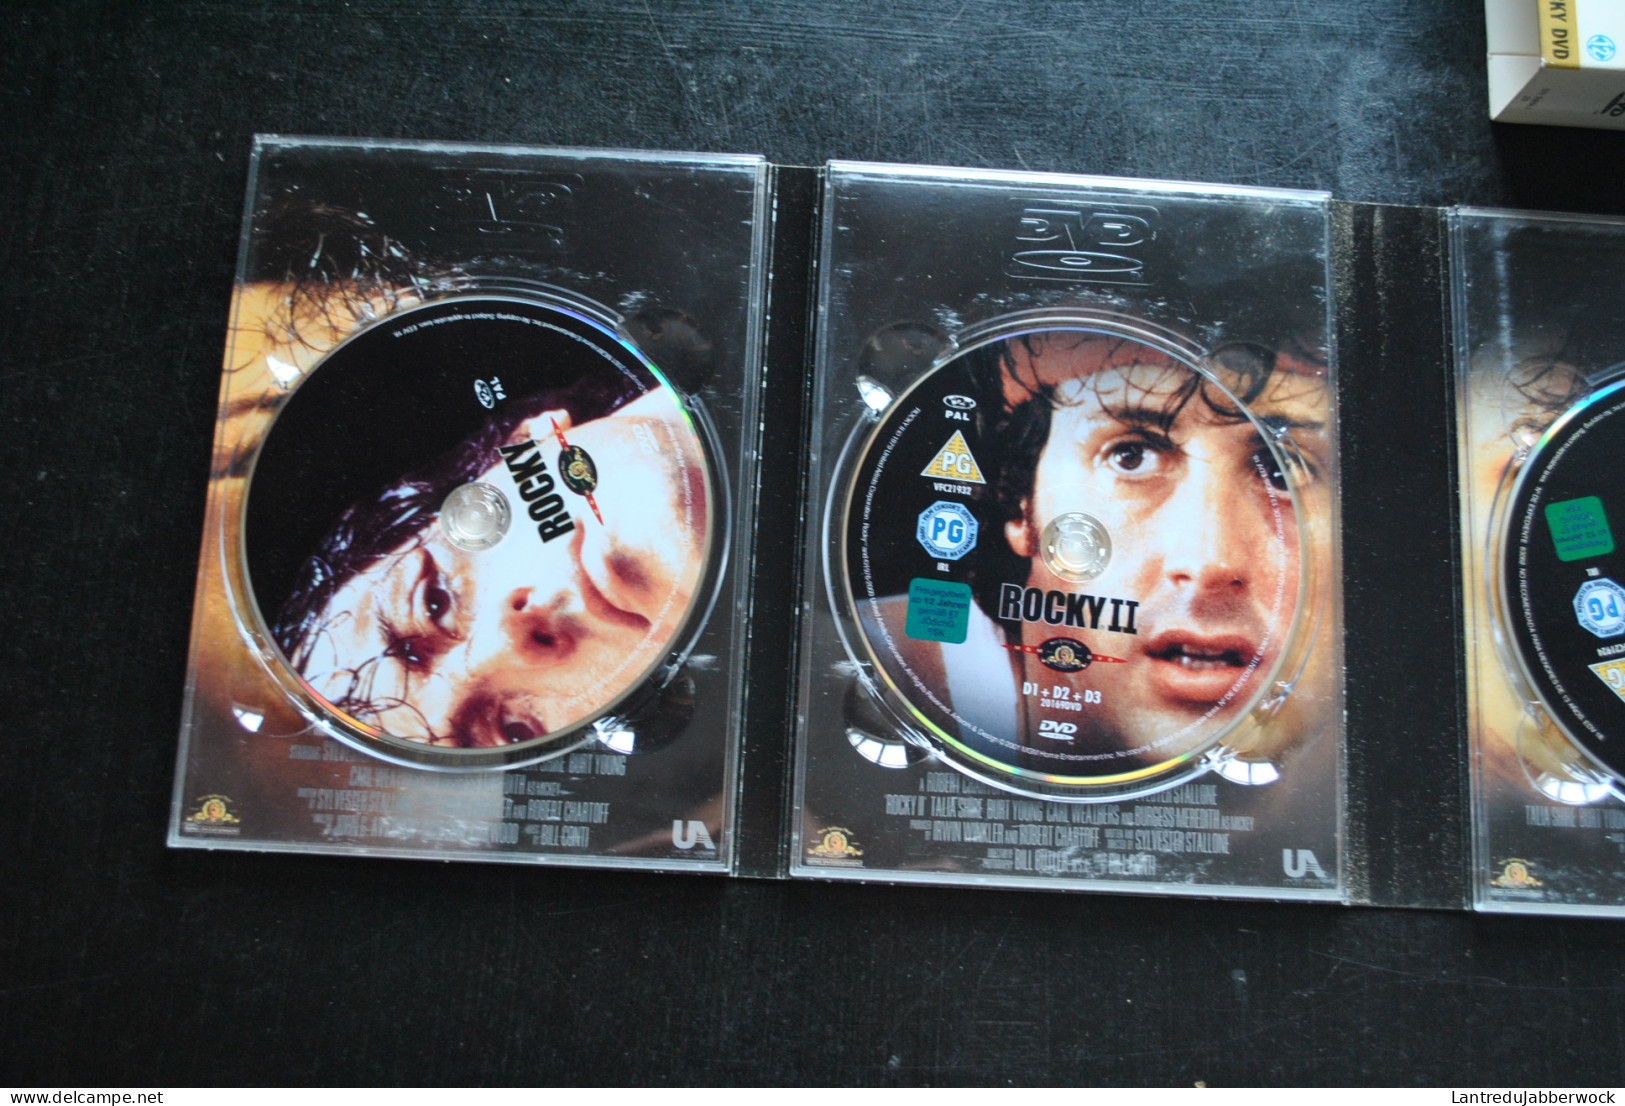 Intégrale DVD Rocky 1 2 3 4 5 Collection Special 25 Ans Stallone - Actie, Avontuur